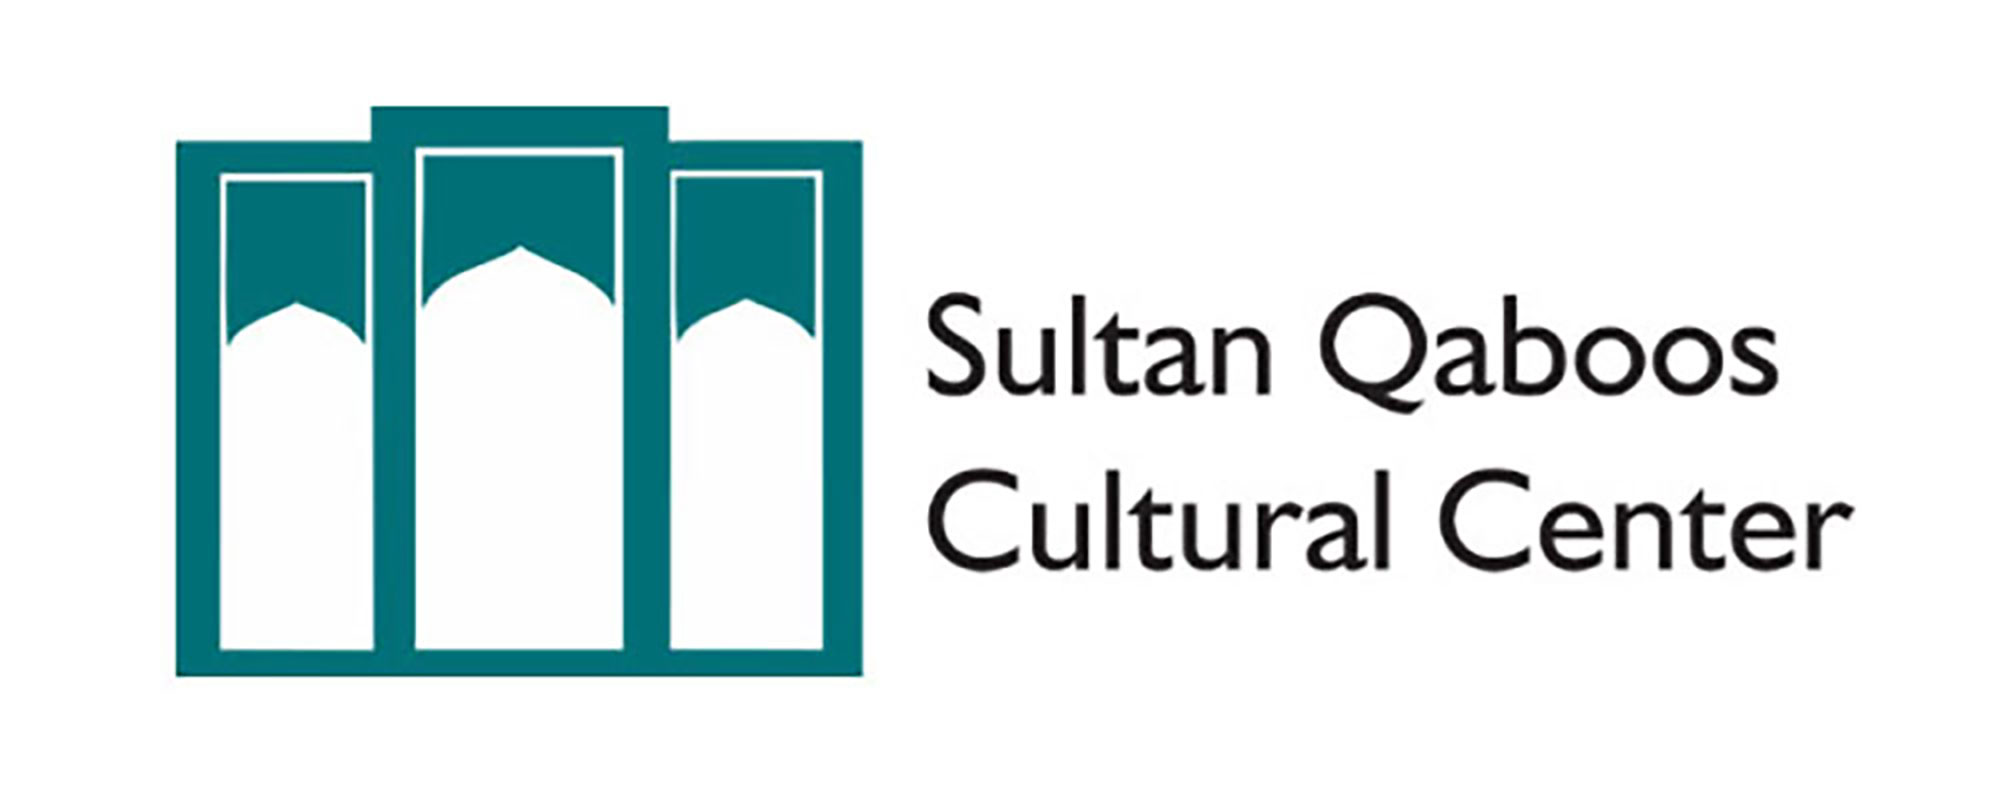 GRAPHIC: The Sultan Qaboos Cultural Center's logo for the 10th annual conference Oct. 23, 2019. Graphic courtesy of the Sultan Qaboos Cultural Center.